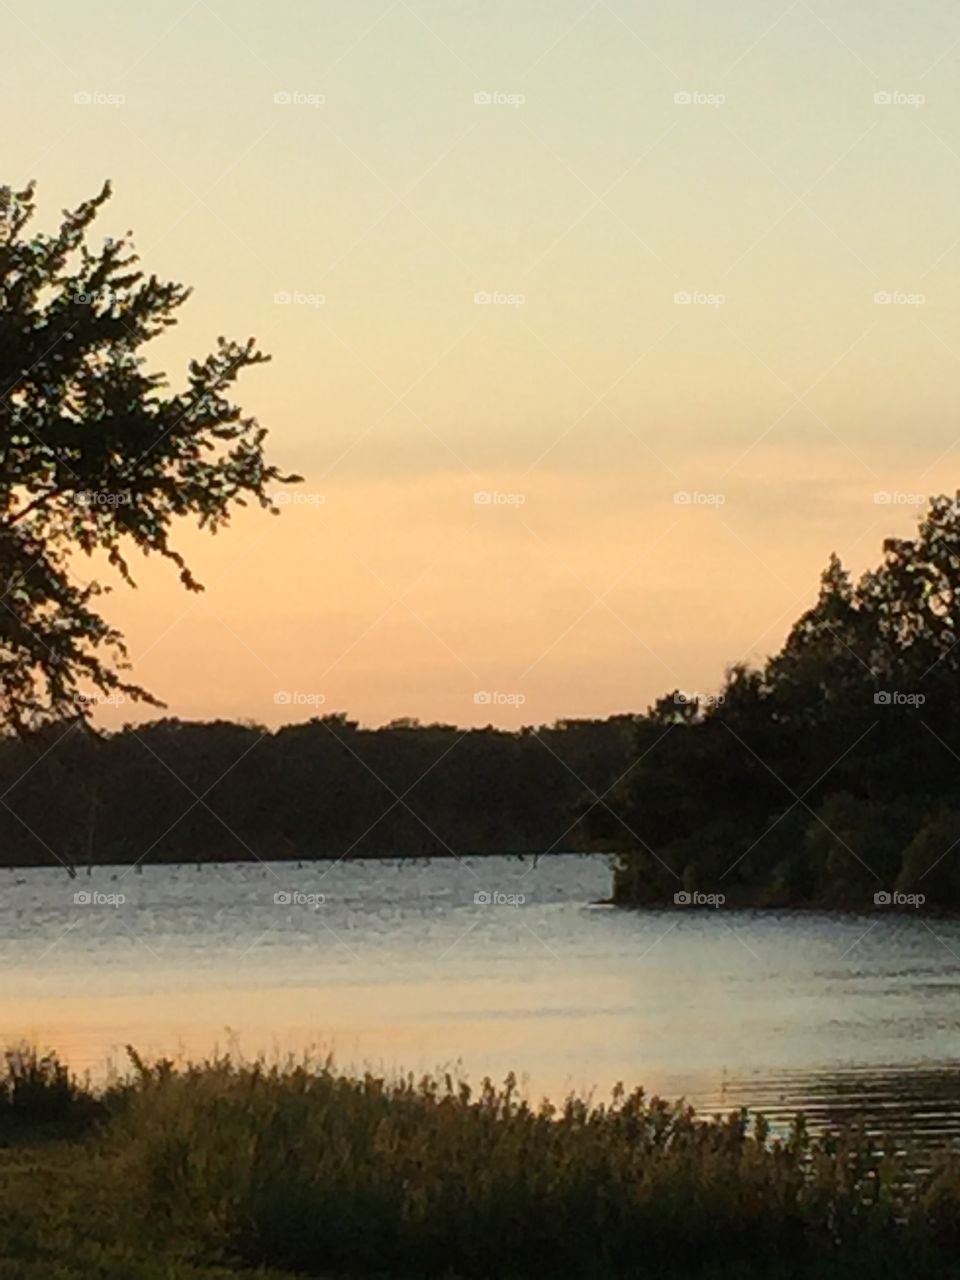 Evening falling upon a Texas lake in summertime 